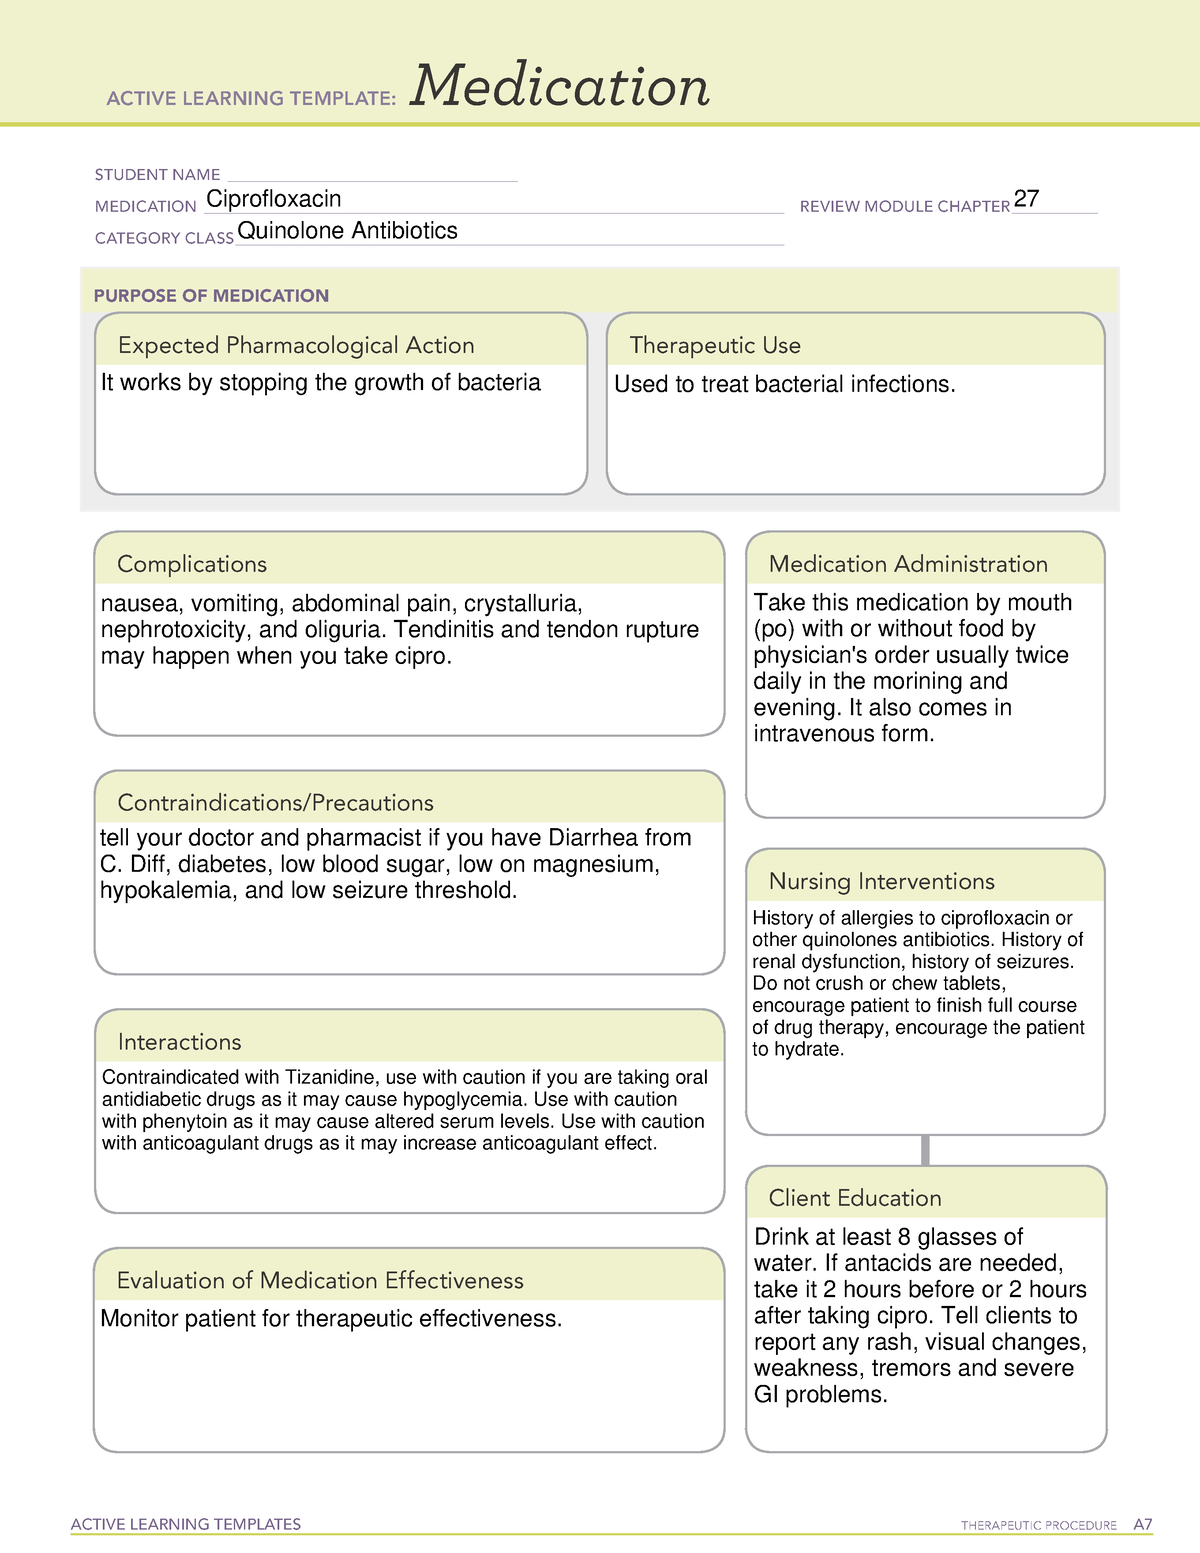 active-learning-template-medication-1-rn-218a-studocu